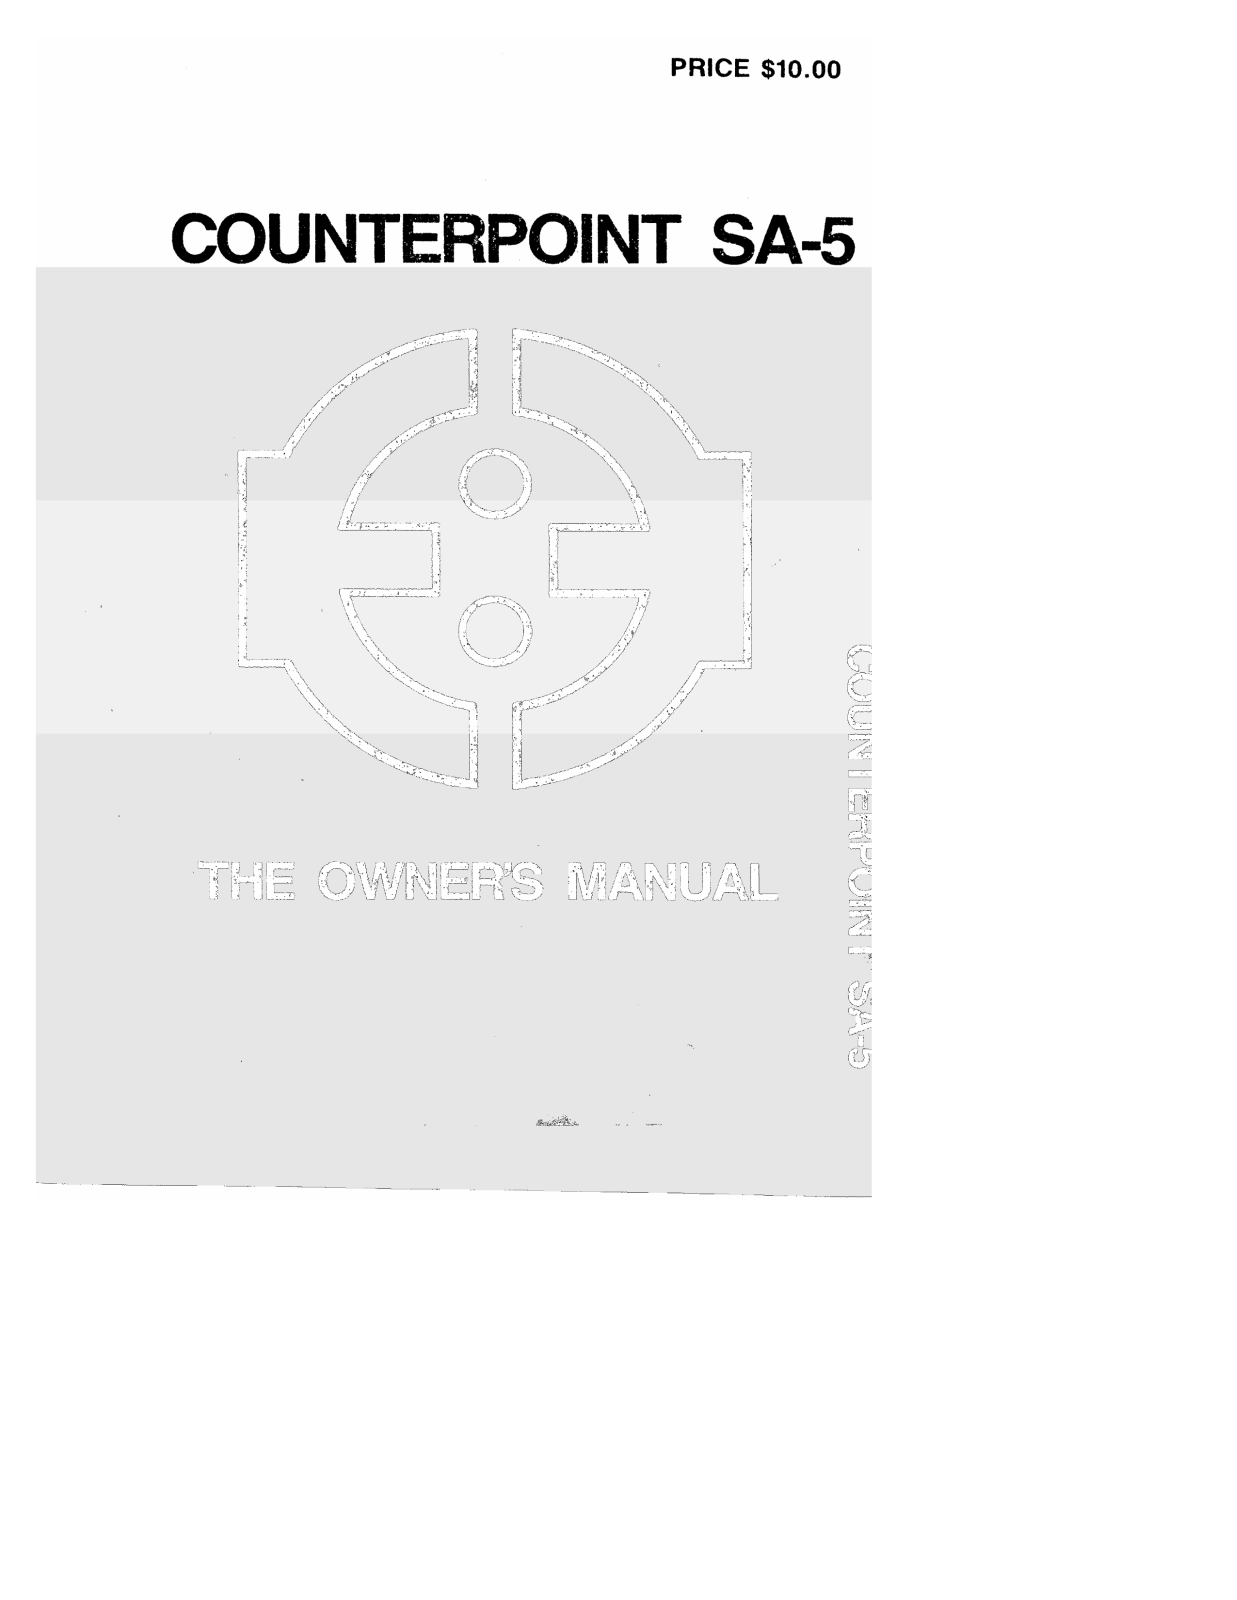 Counterpoint SA-5 Owners manual